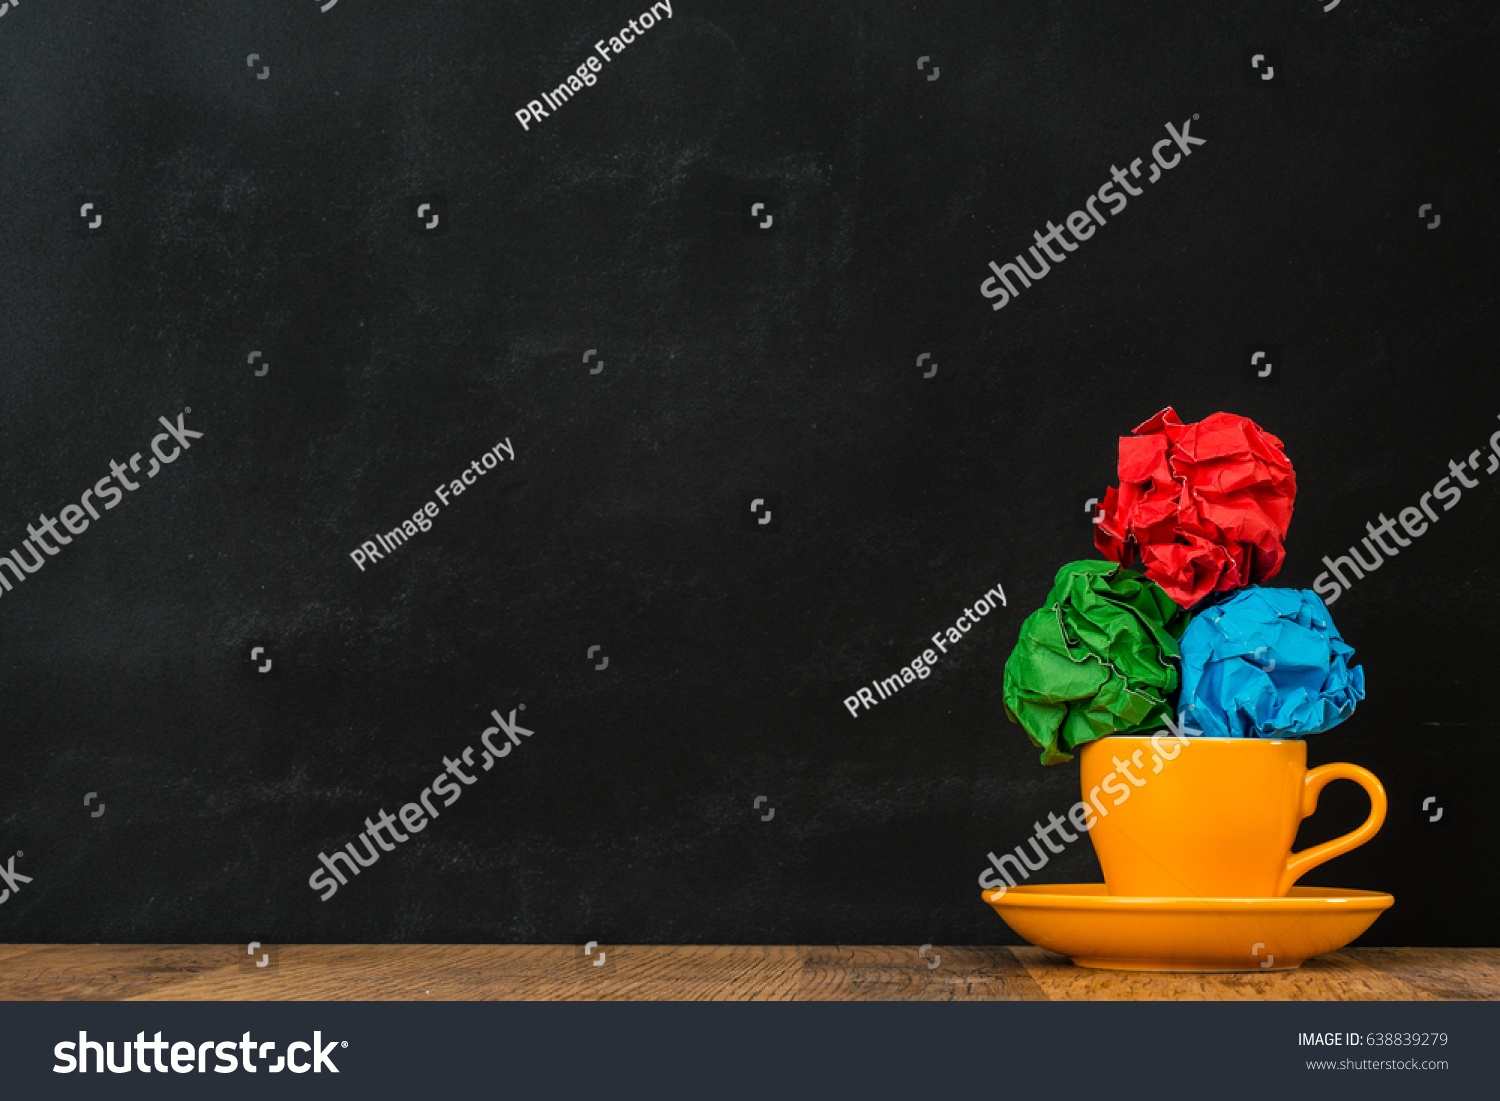 smooth glossy ceramic orange coffee cup put on the wooden surface table with color paper balls stacked together showing blackboard background. #638839279